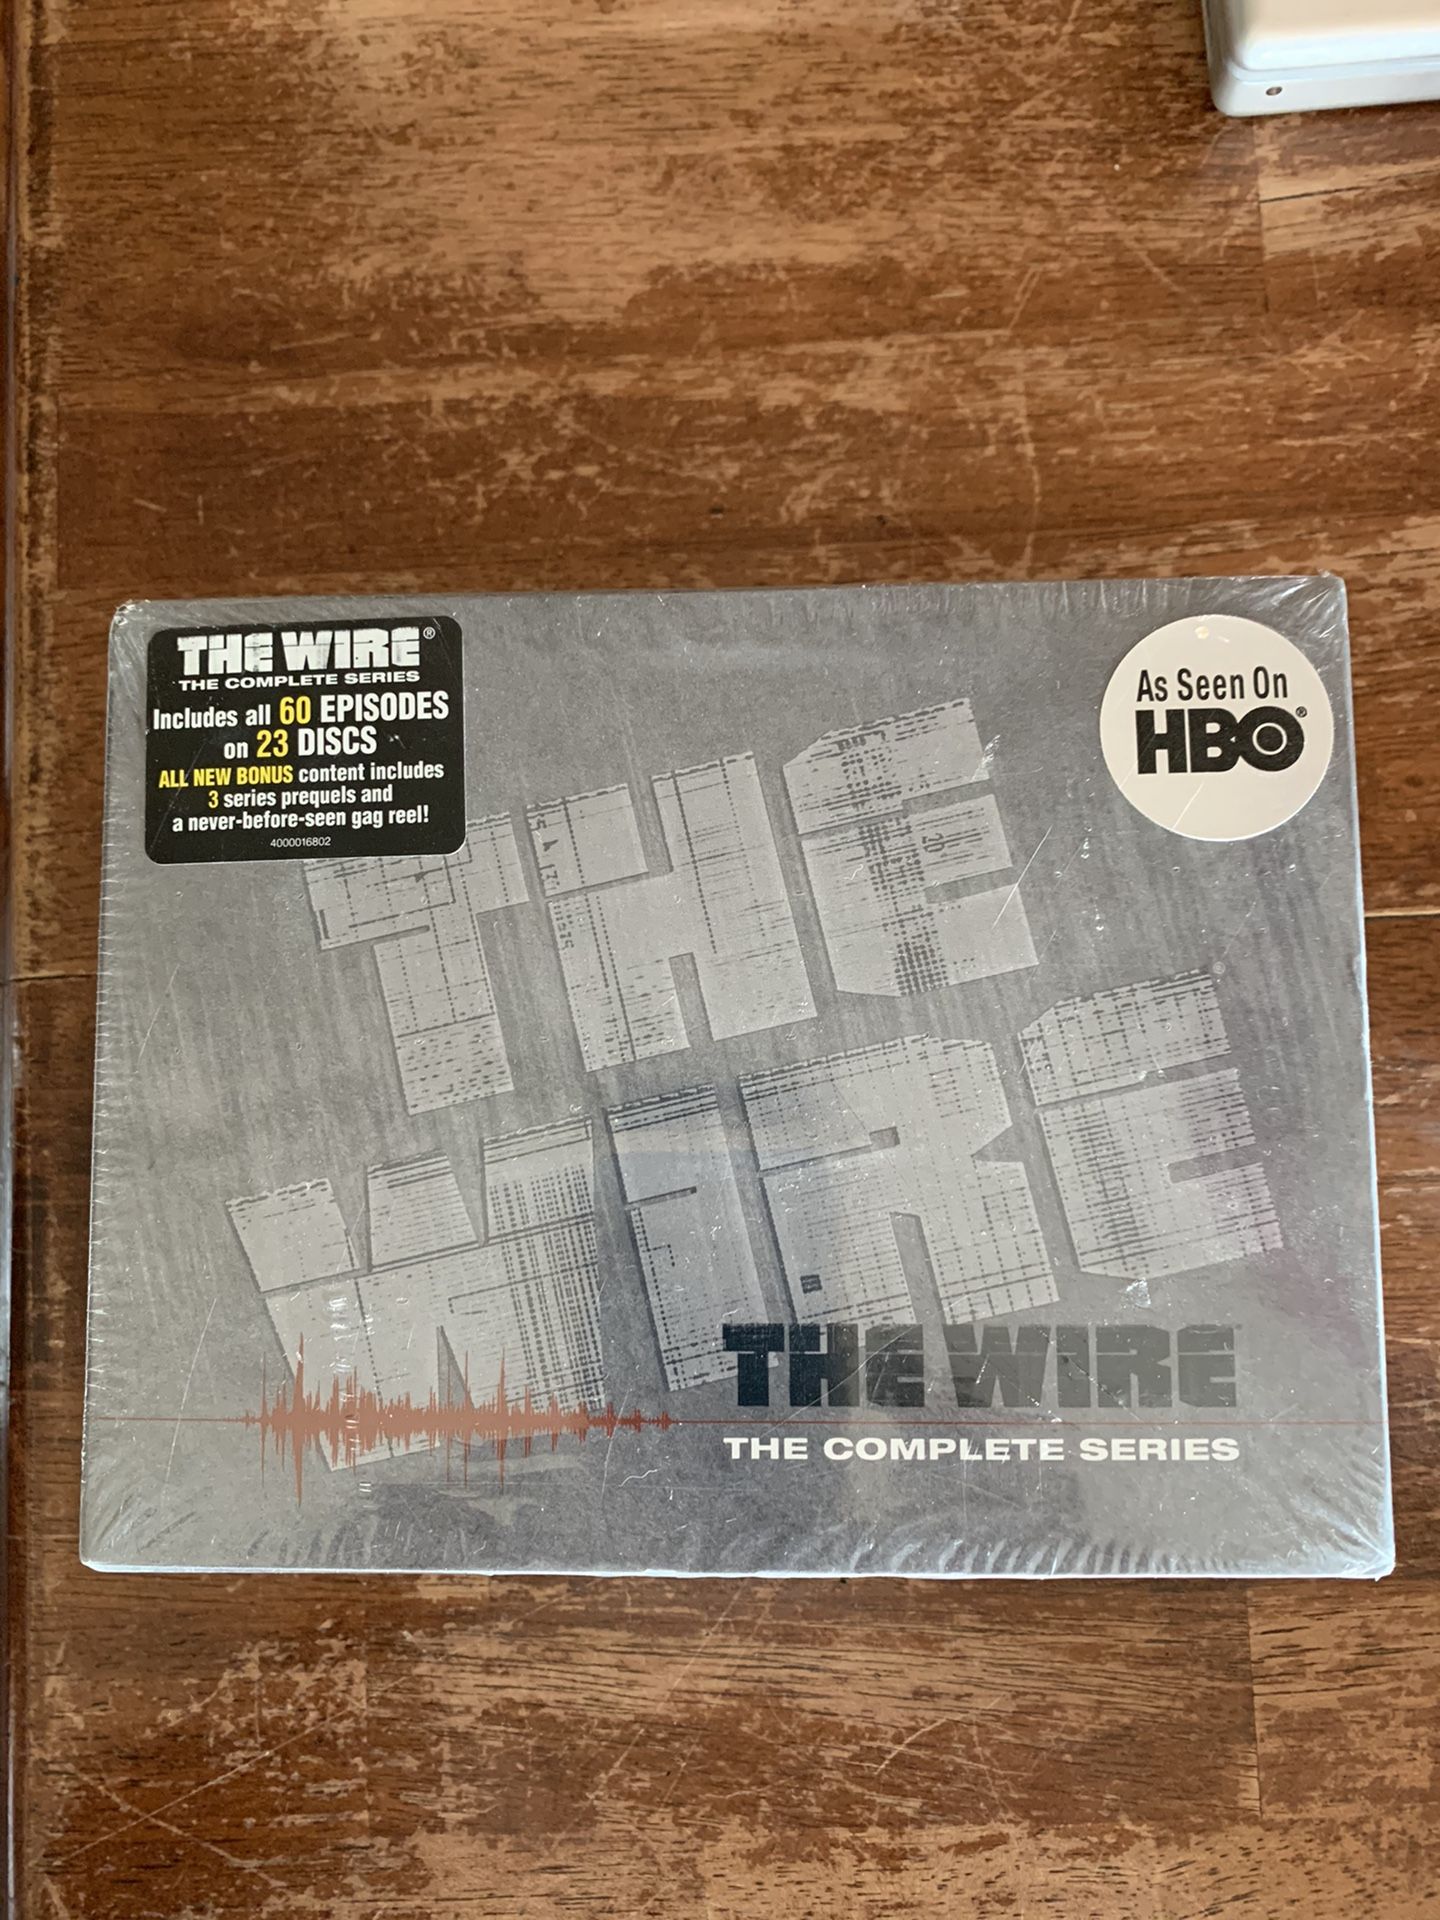 “The Wire” HBO DVD Box Set New/Sealed-The Complete Series